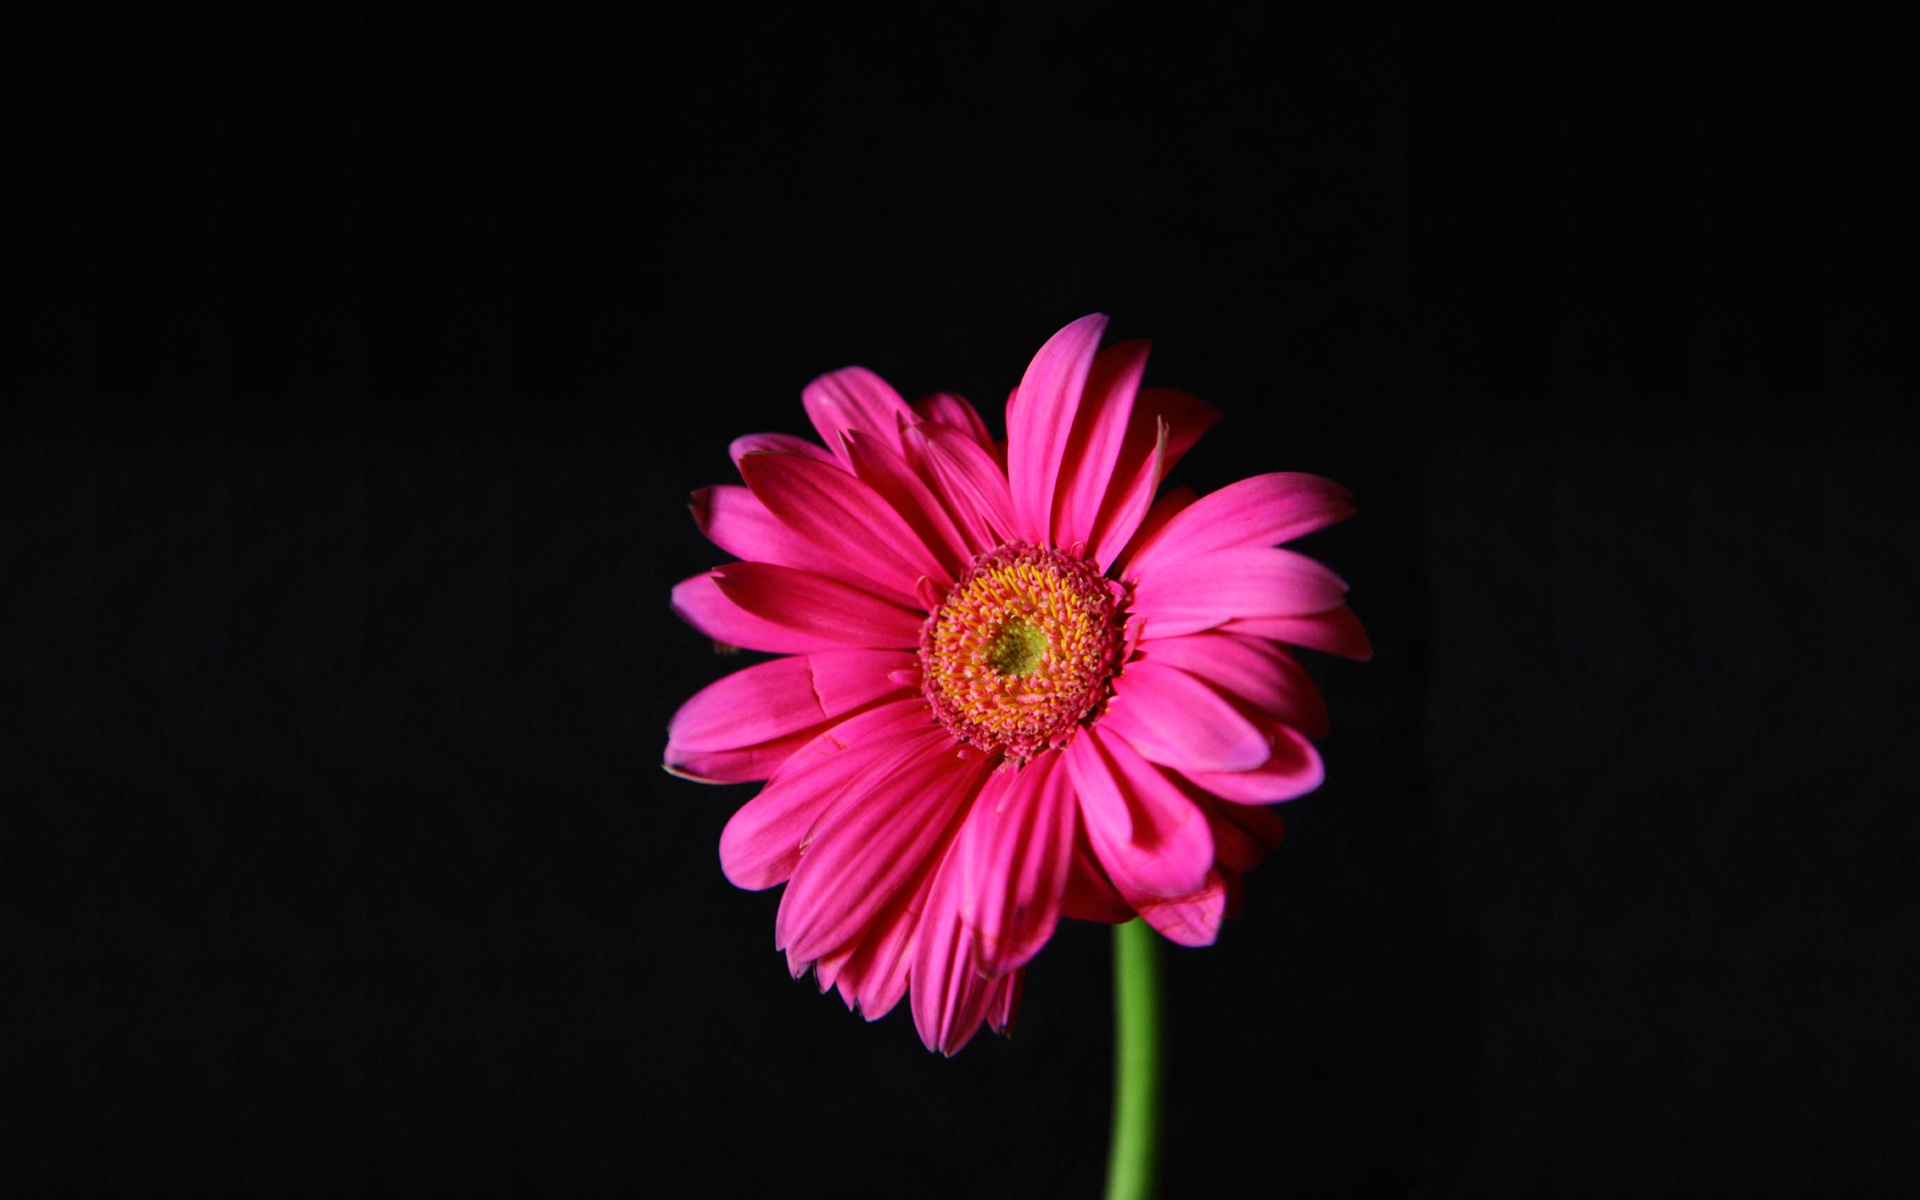 Hot Pink Gerber Daisy 1920x1200 wallpaper download page 369291 1920x1200